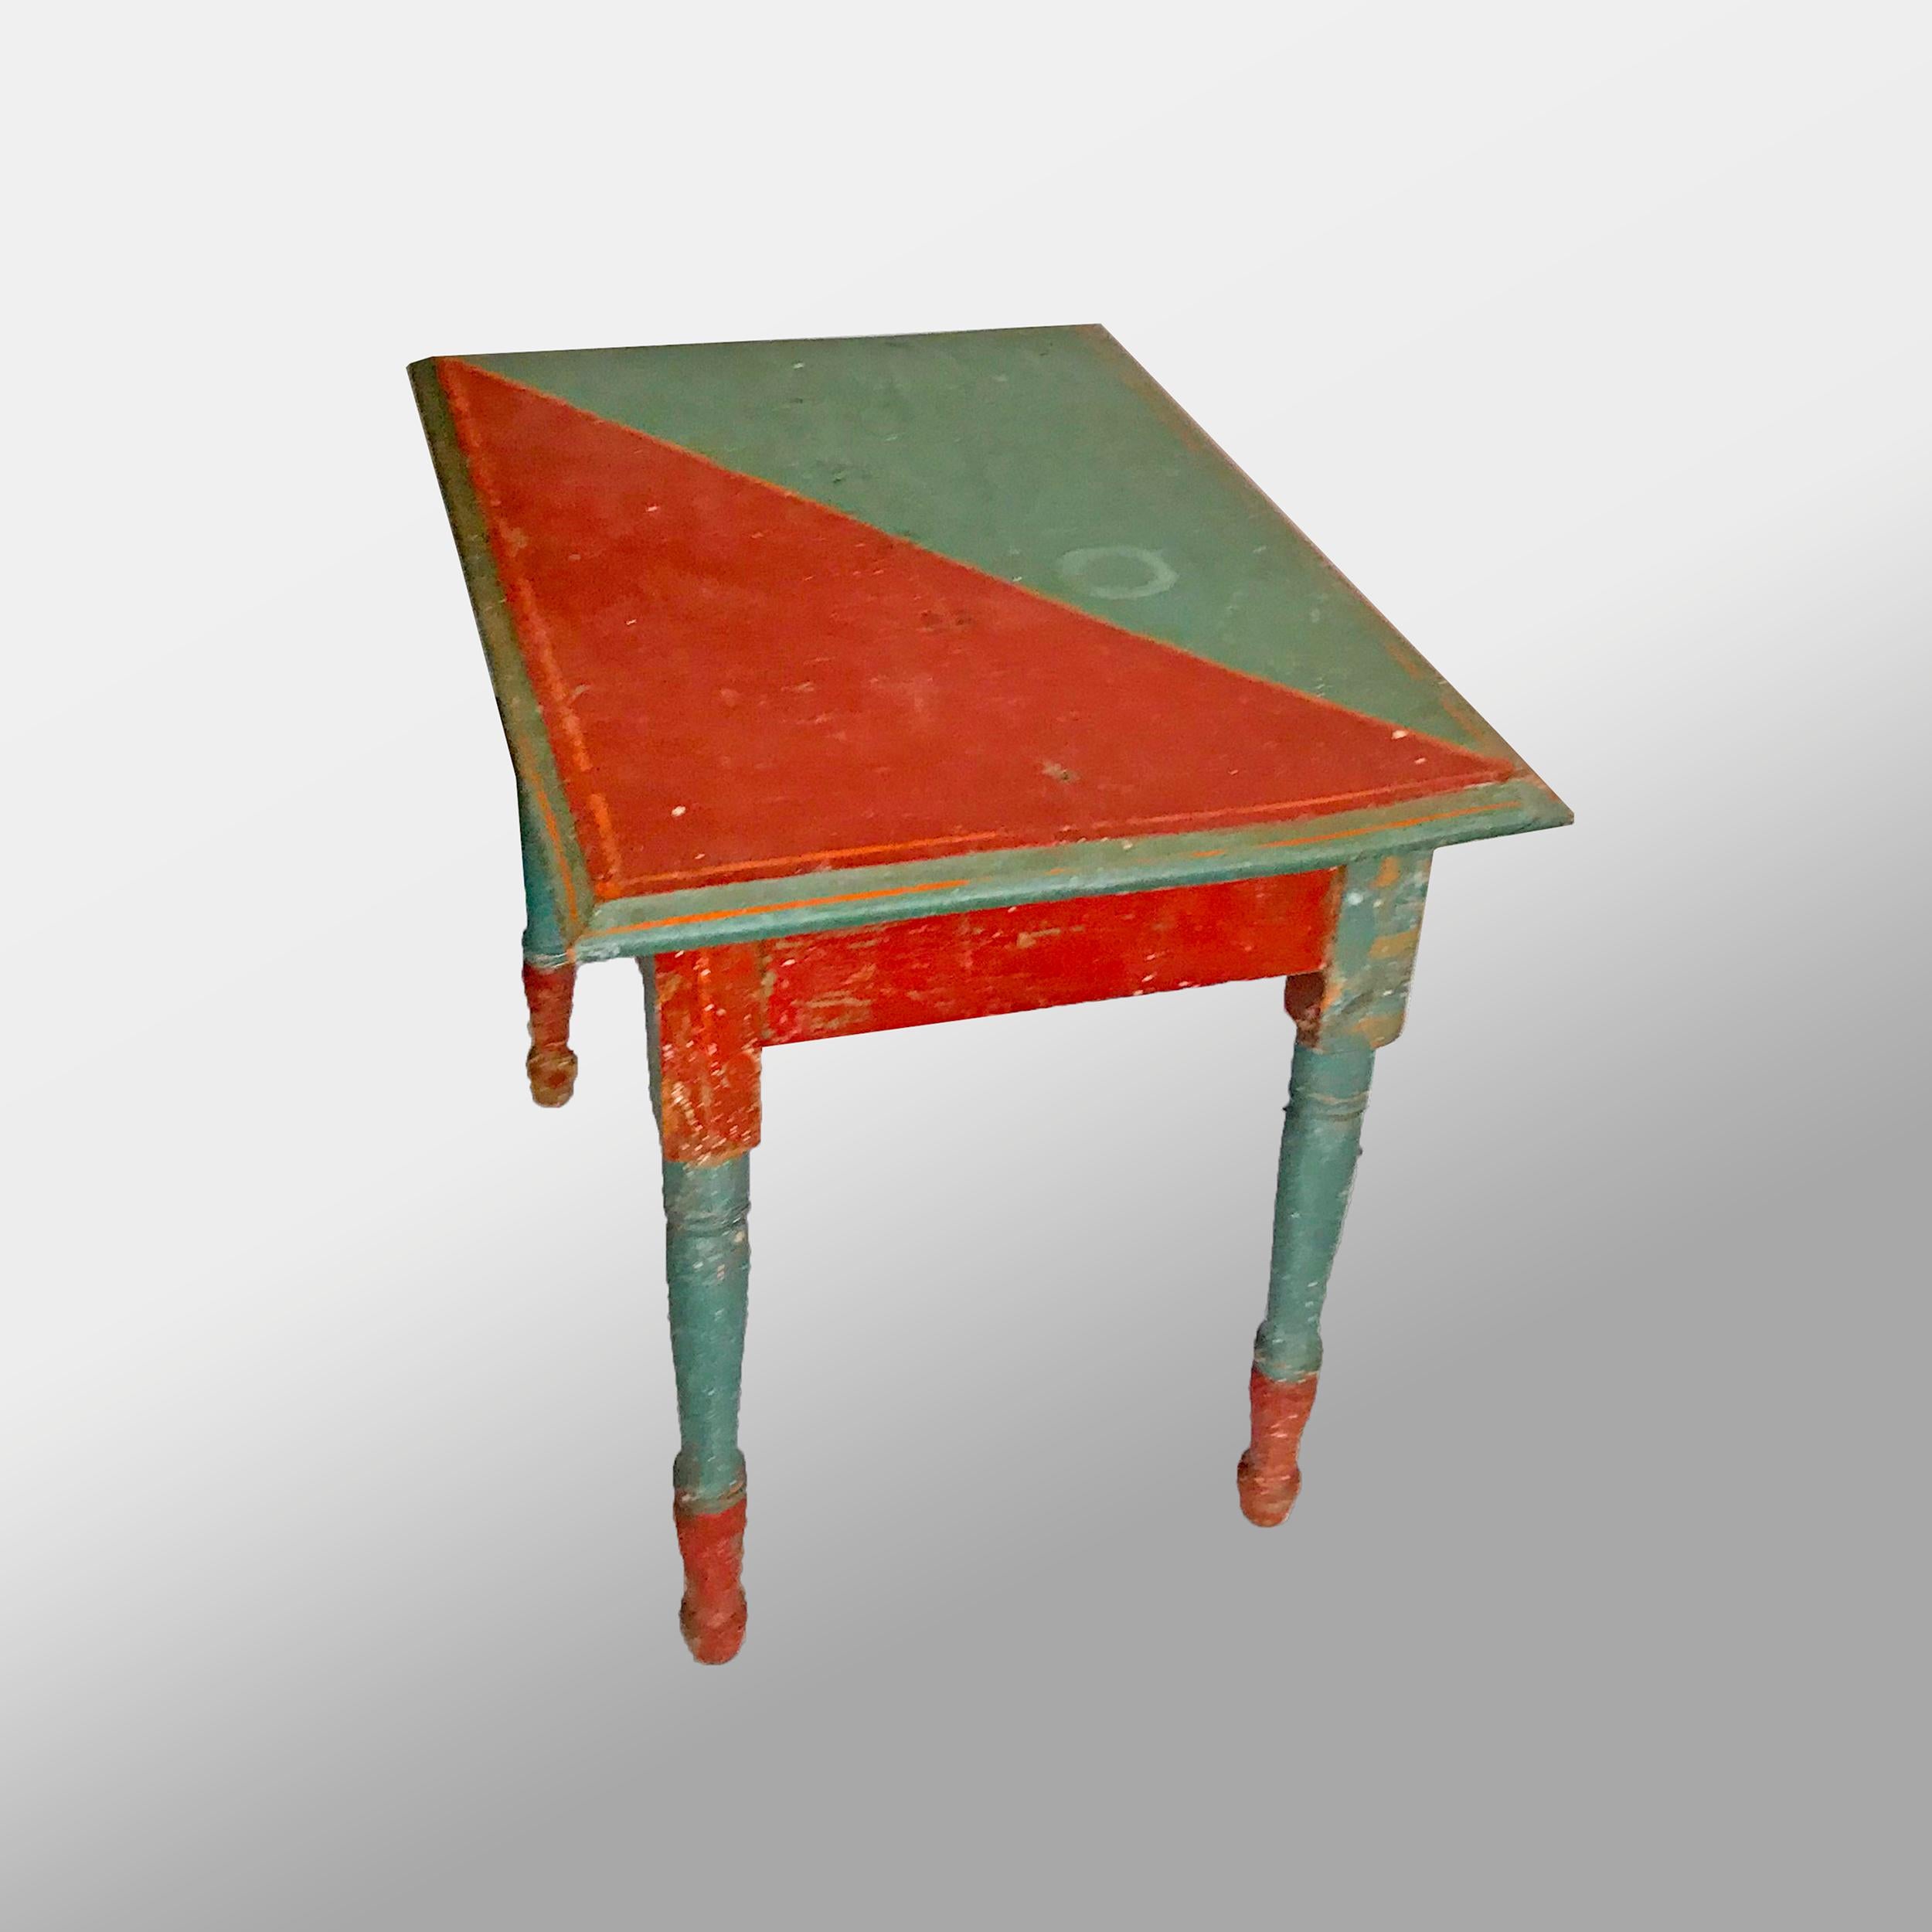 Made of pine and decorated with a red and blue pattern throughout with orange stringing border on top and a single knob-less drawer on spool turned legs.
American, circa 1900-1920
Measures: 20 ¼” x 24” x 17 ¼”.
 